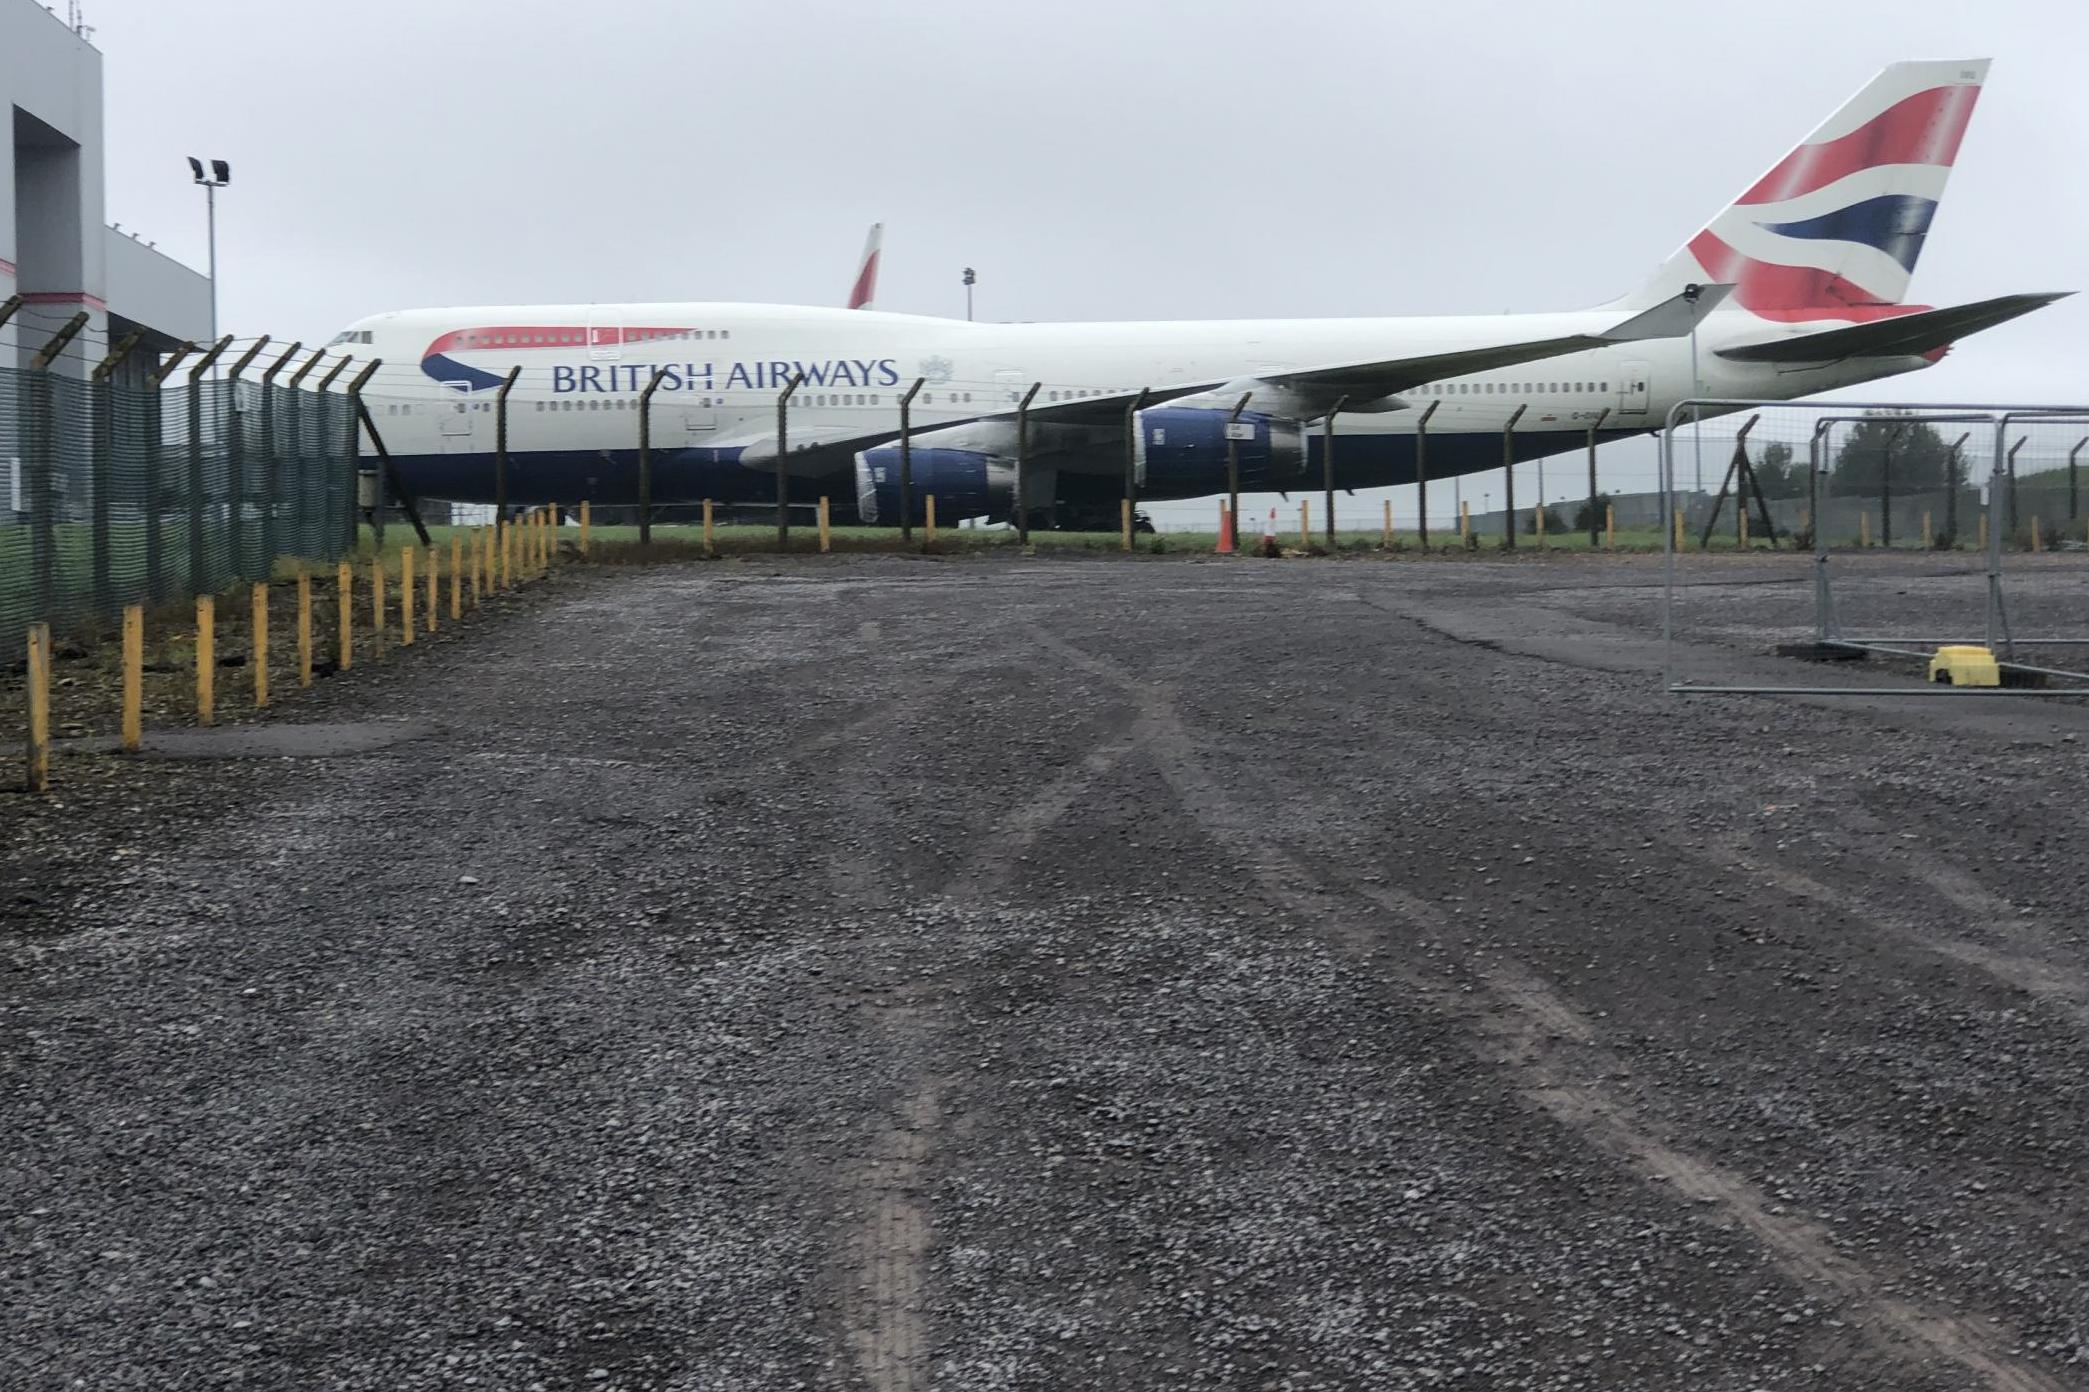 Parking space: Cardiff airport is currently home to some British Airways Jumbo jets